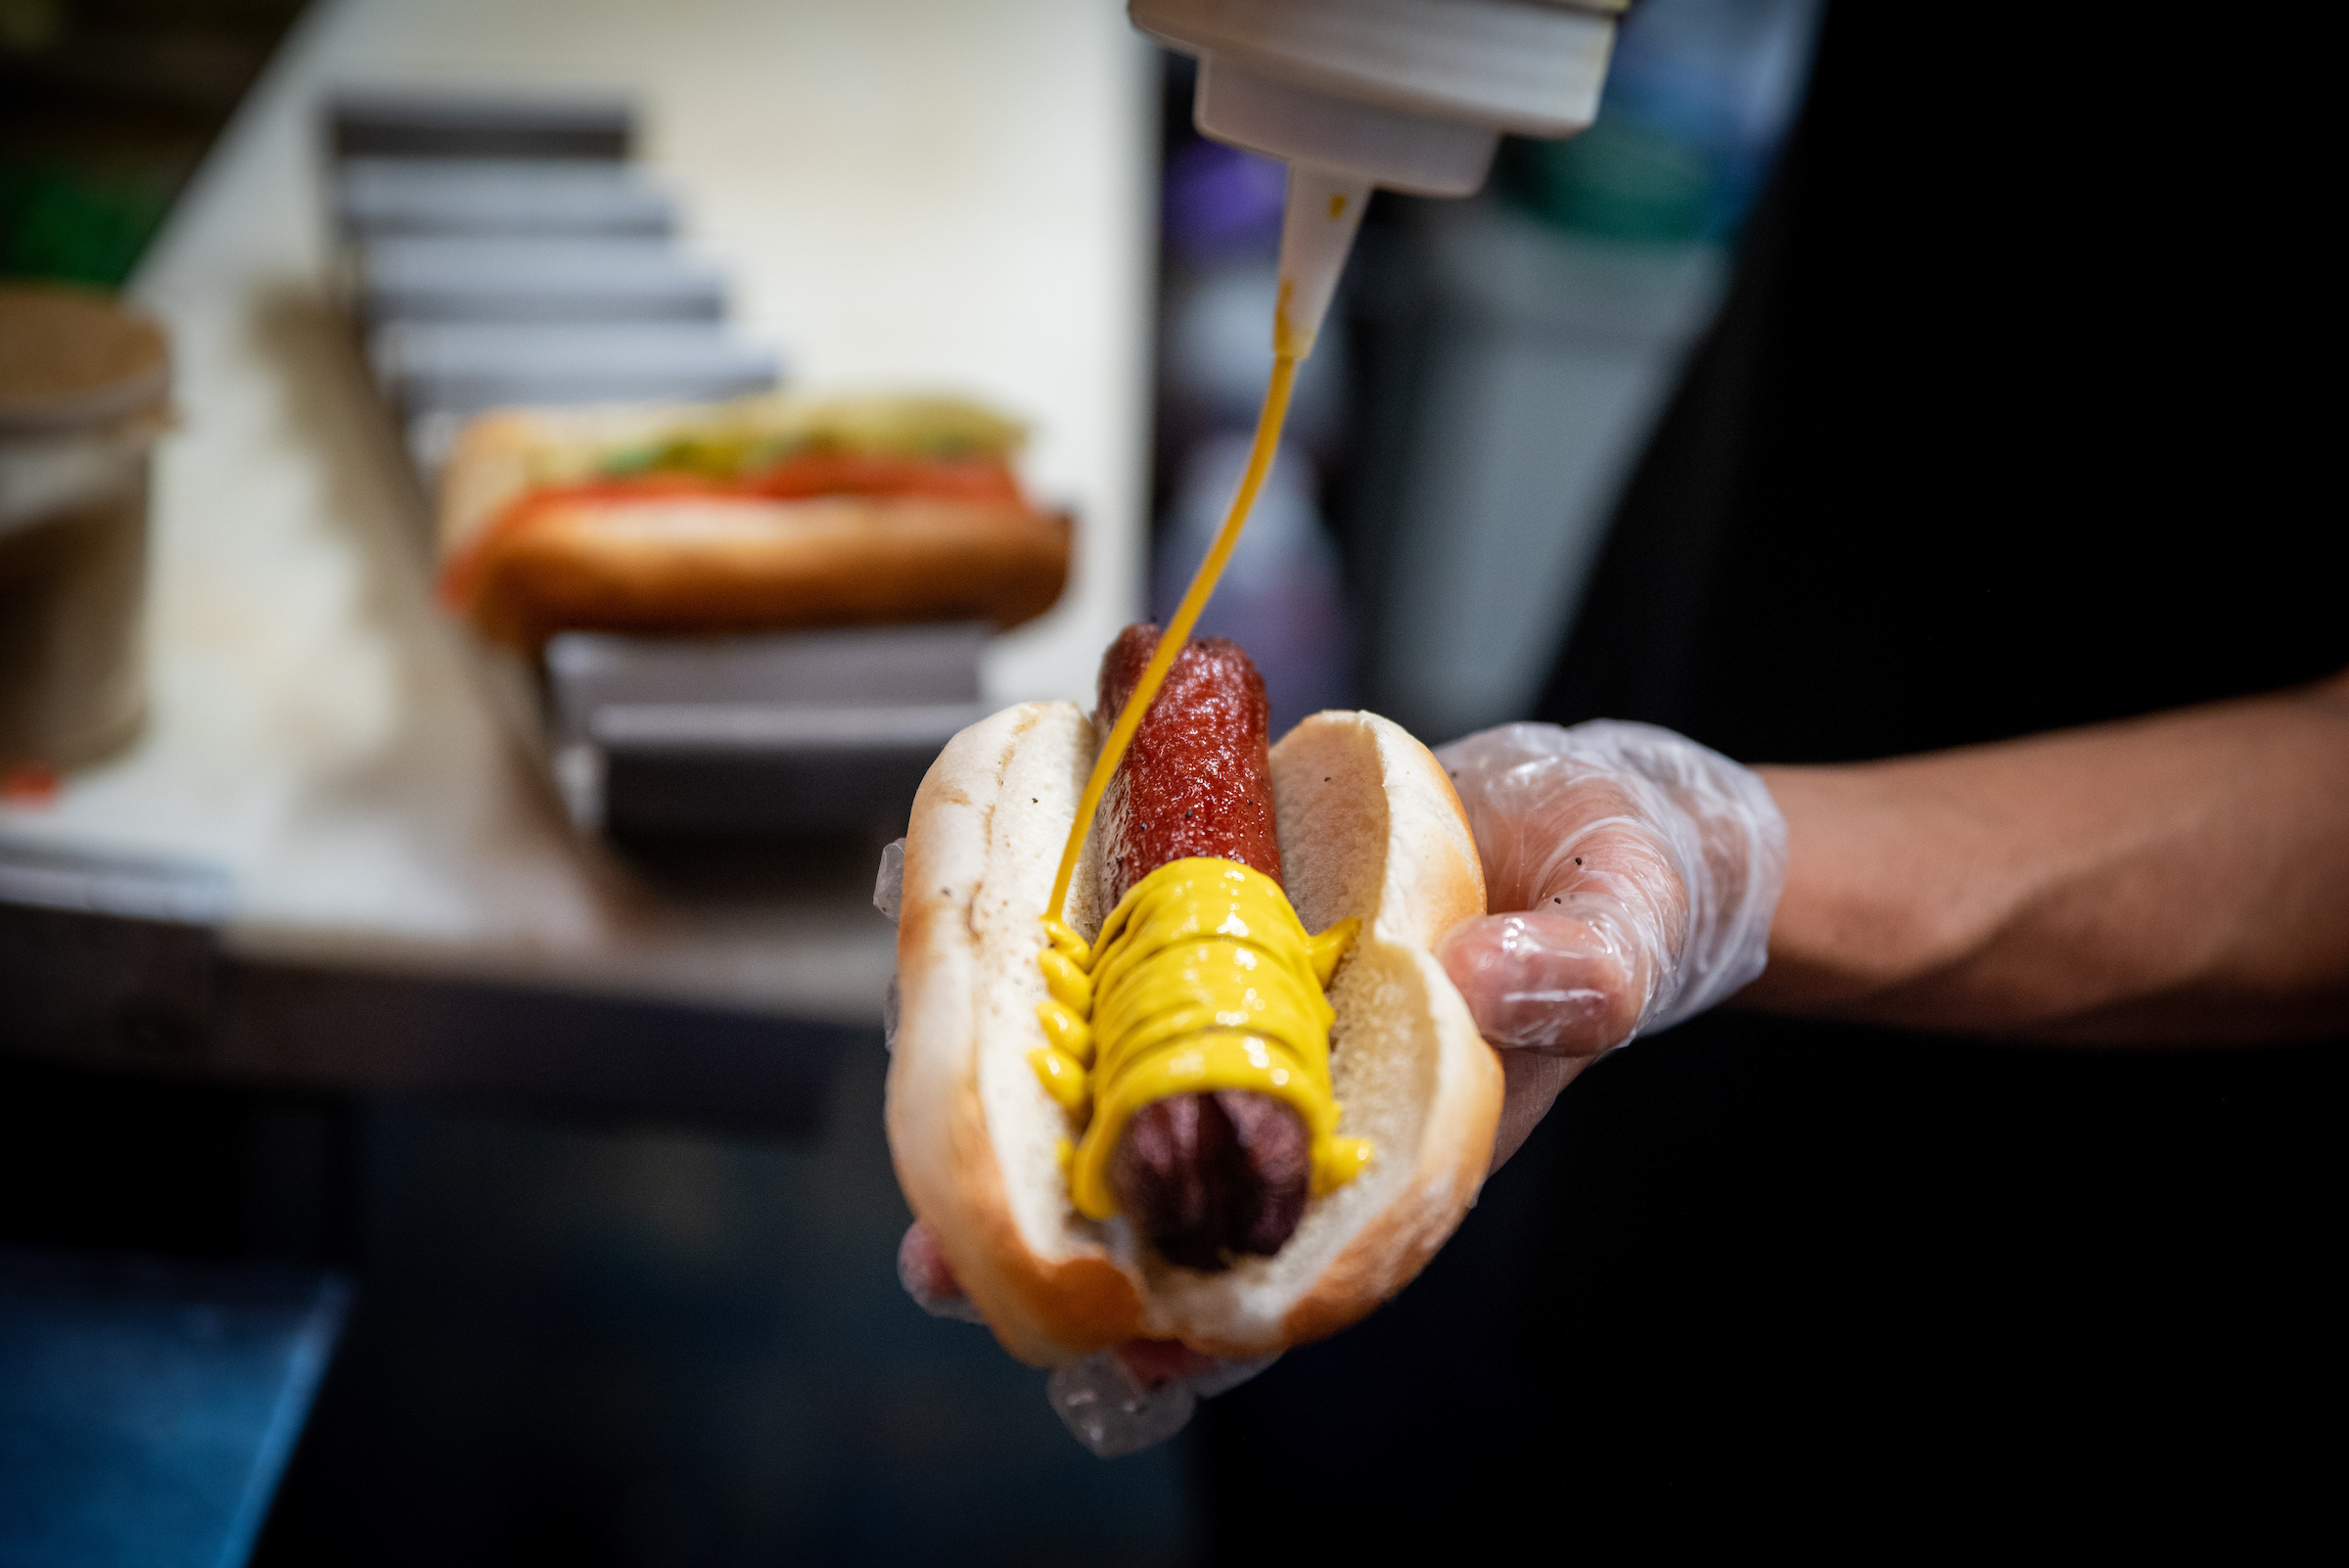 Windy City Hot Dog Fest Bringing Chicago Classics And Wacky Wieners To